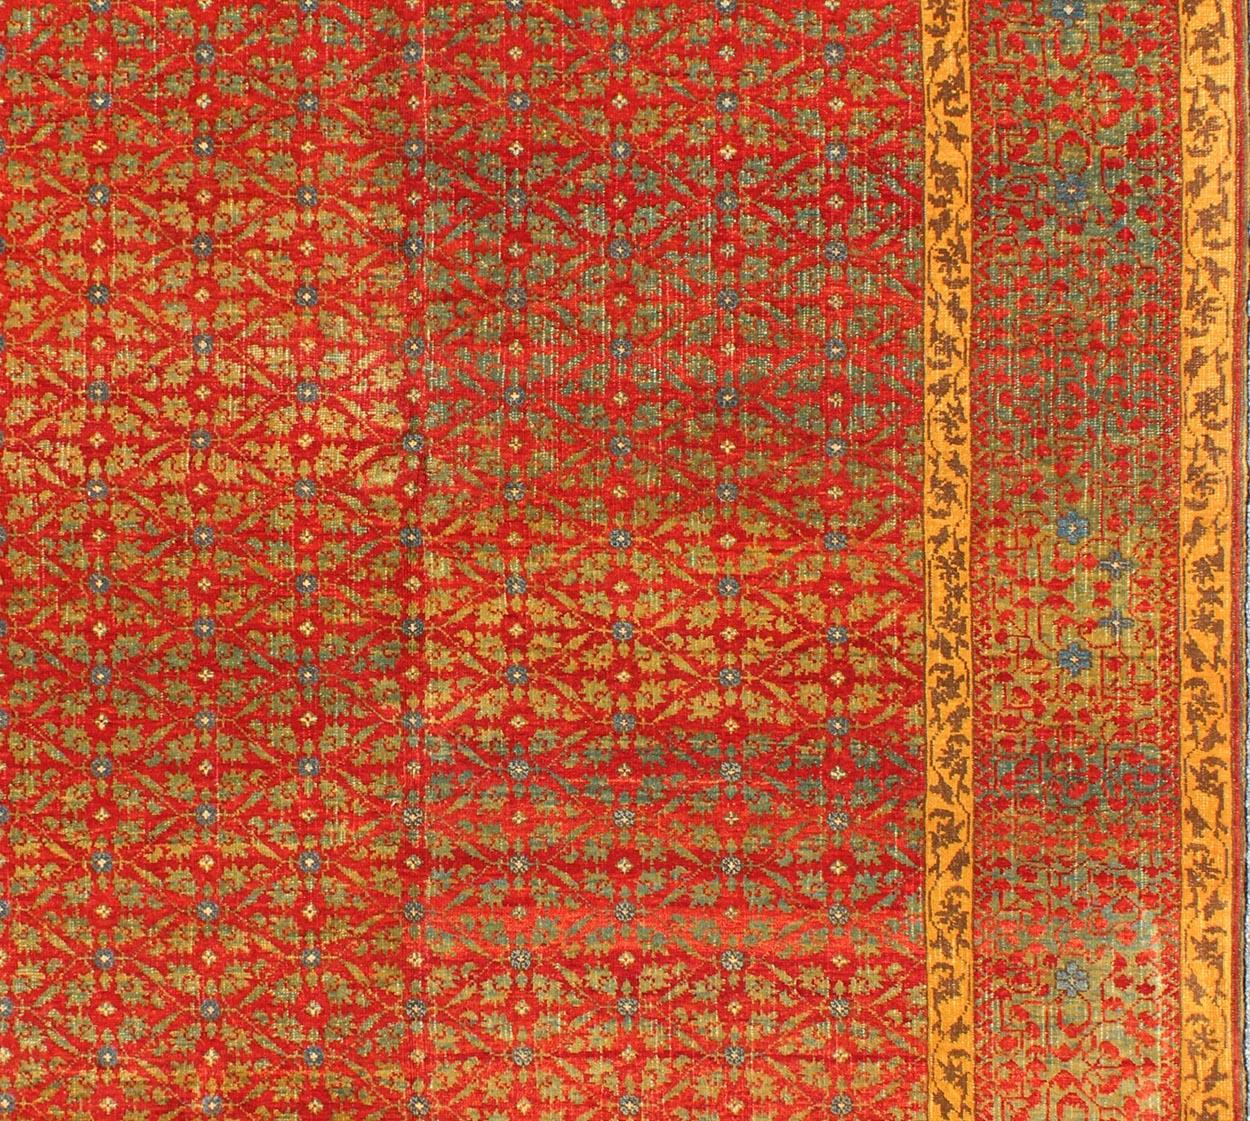 Vintage Ottoman Rug, rug WL-233214, country of origin / type: Turkey / Mamluk, circa Late-20th Century.

Measures: 5'0 x 5'11.

This Ottoman inspired, finely woven rug was handwoven in Turkey in the later part of the 20th Century. The red color